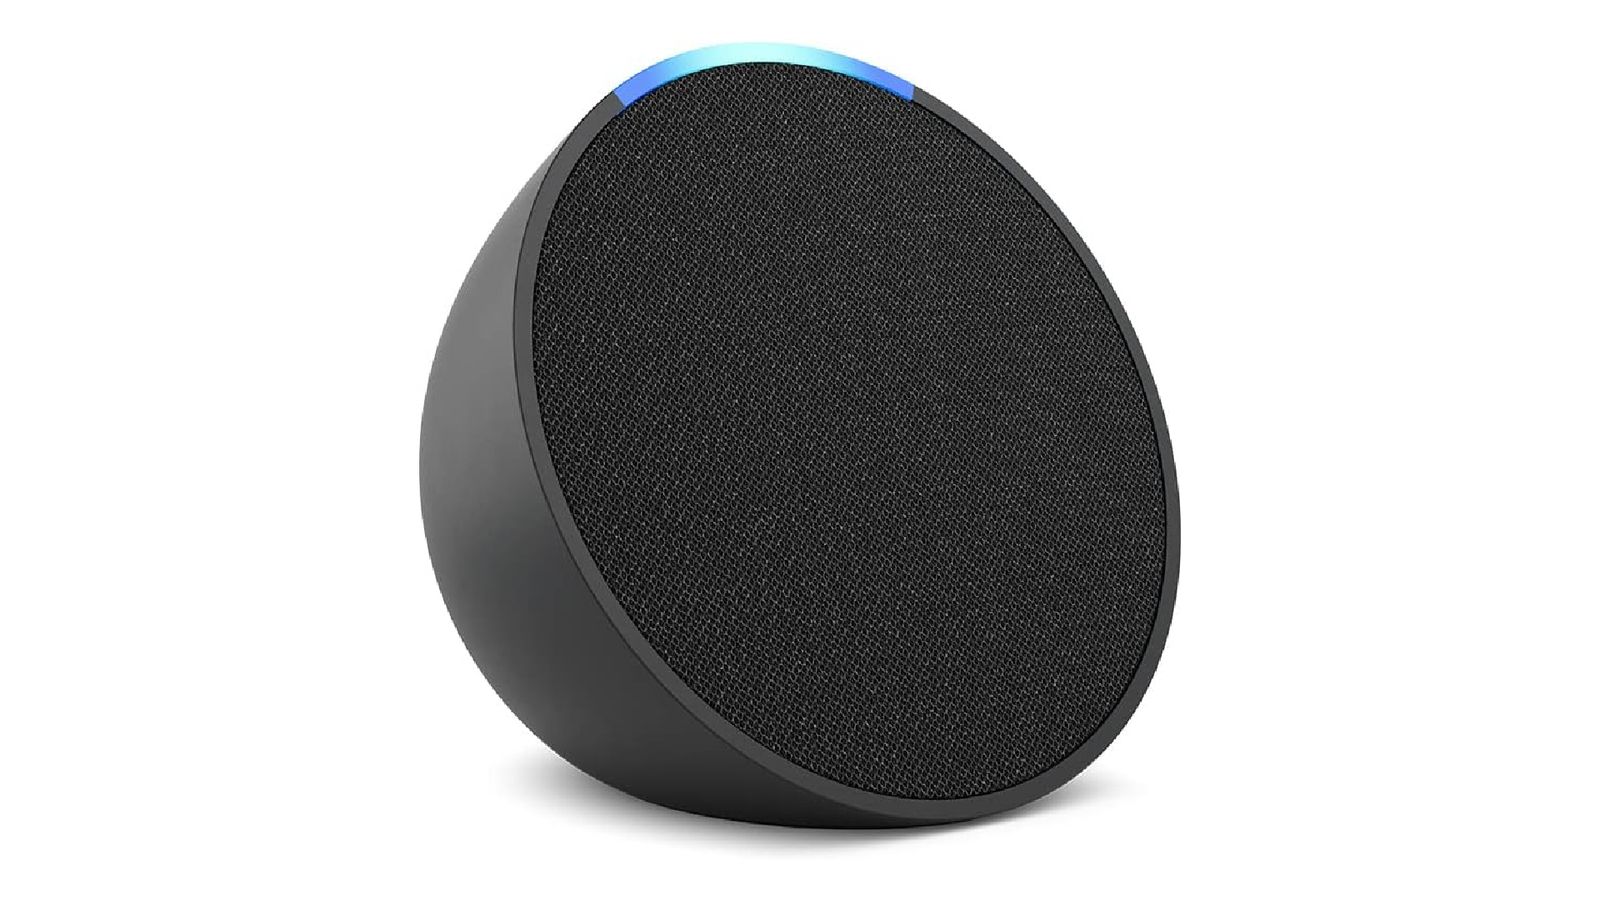 Echo Pop product image of a circular black speaker with a blue light at the top.